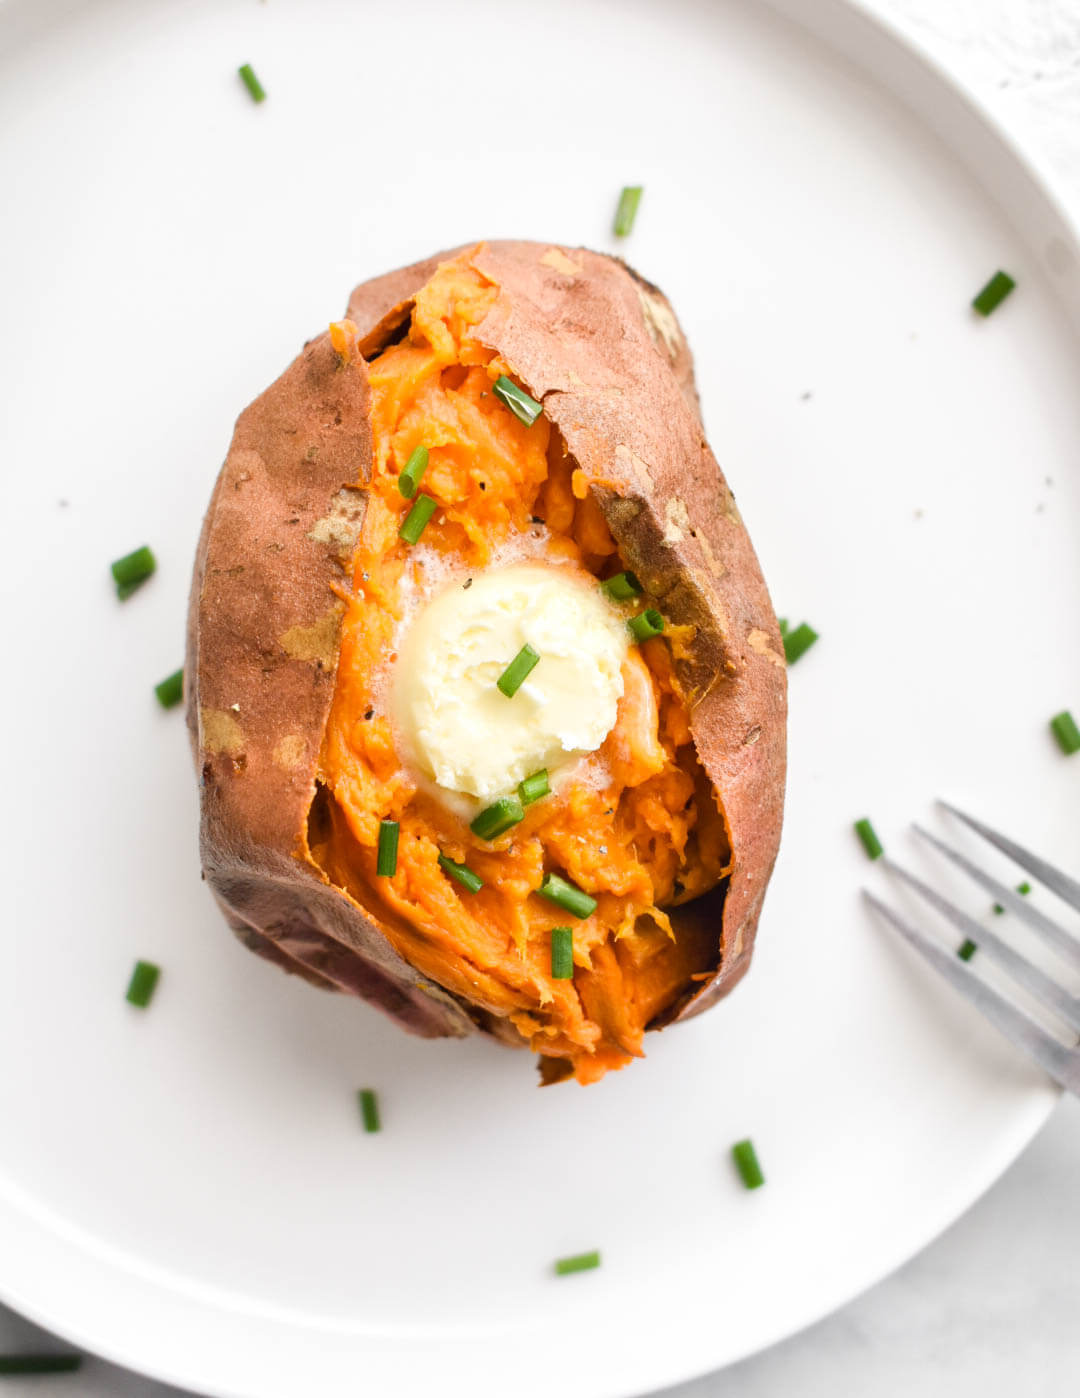 A baked sweet potato topped with a pat of butter and fresh chives on a white plate.